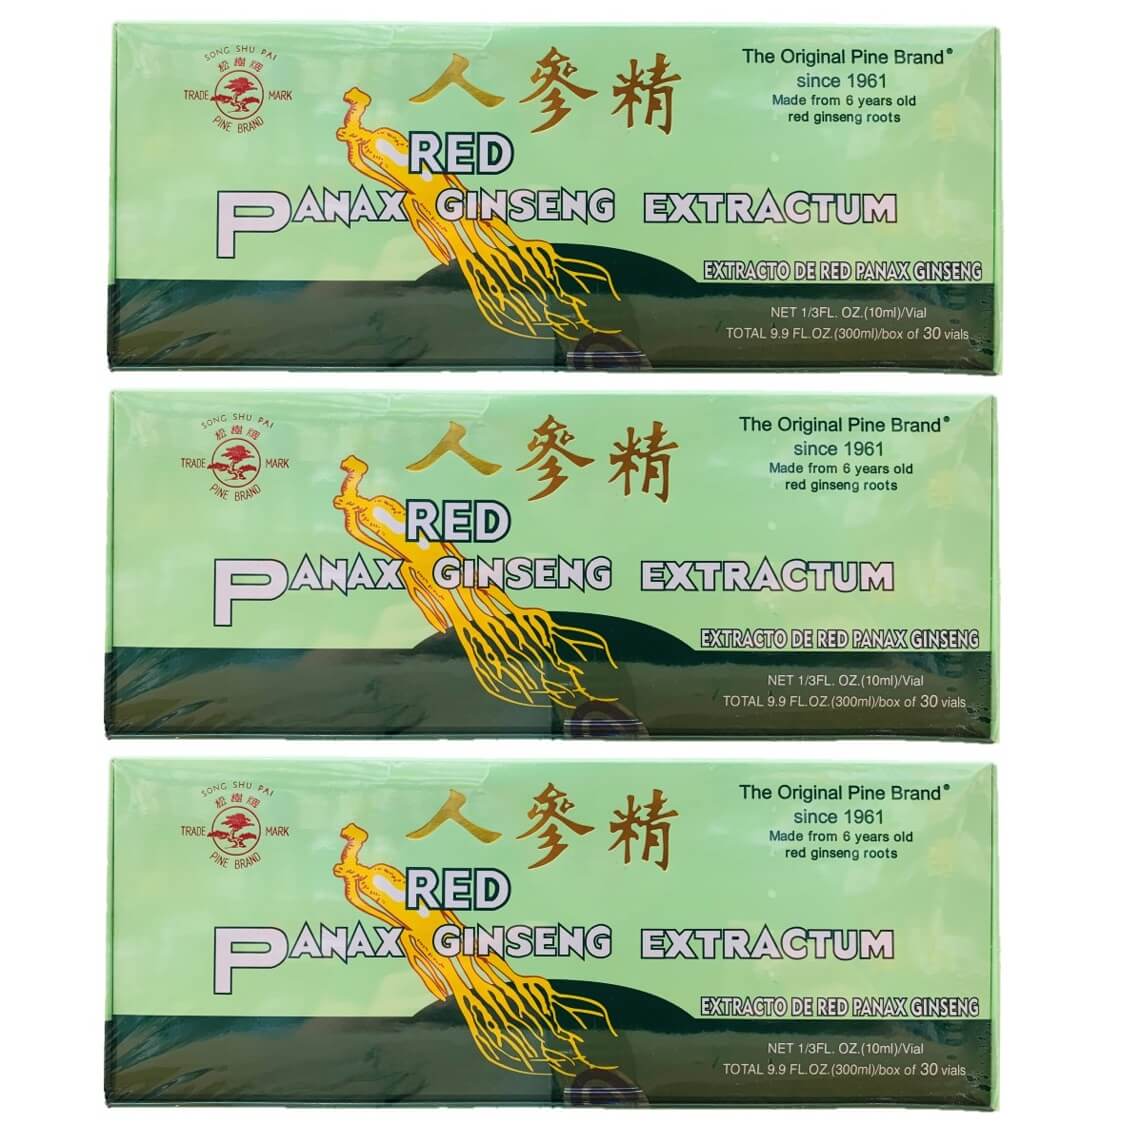 Song Shu Pai Red Panax Ginseng Extractum (30 Vials X 10ml) - 3 Boxes - Buy at New Green Nutrition